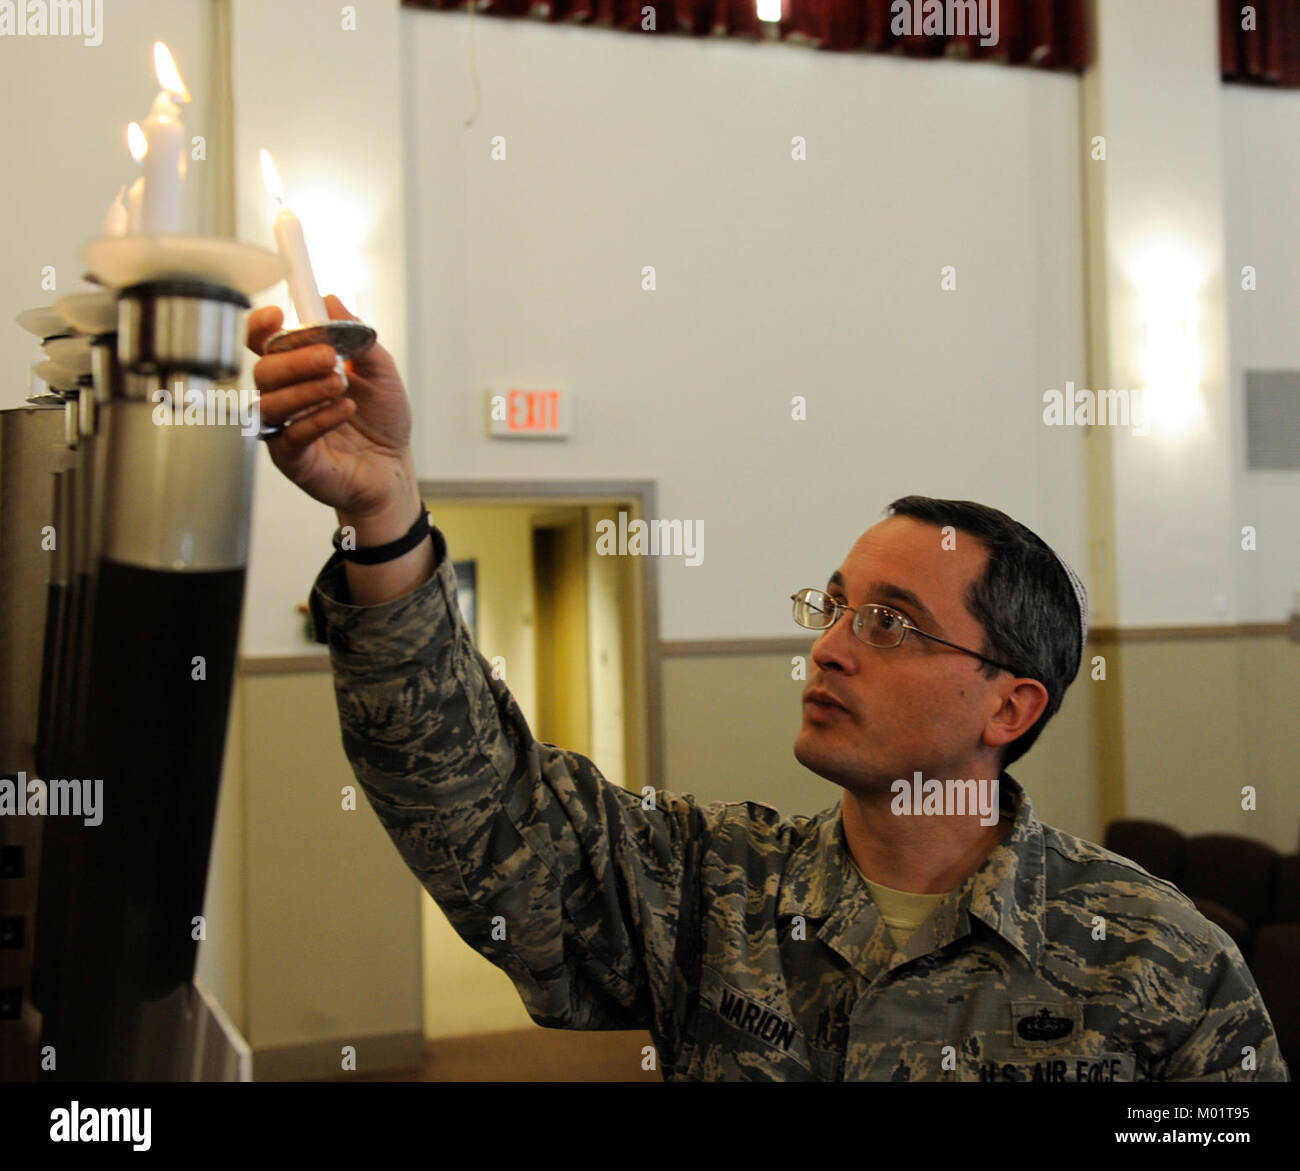 Tech. Sgt. Michael Marion, a cyber transport systems craftsman assigned to the 28th Communications Squadron, lights the menorah in the Freedom Chapel at Ellsworth Air Force Base, S.D., Dec. 19, 2017. The menorah, lit every night during Chanukah, commemorates the Jewish victory against Syrian-Greek oppressors in second-century B.C.E. (U.S. Air Force Stock Photo